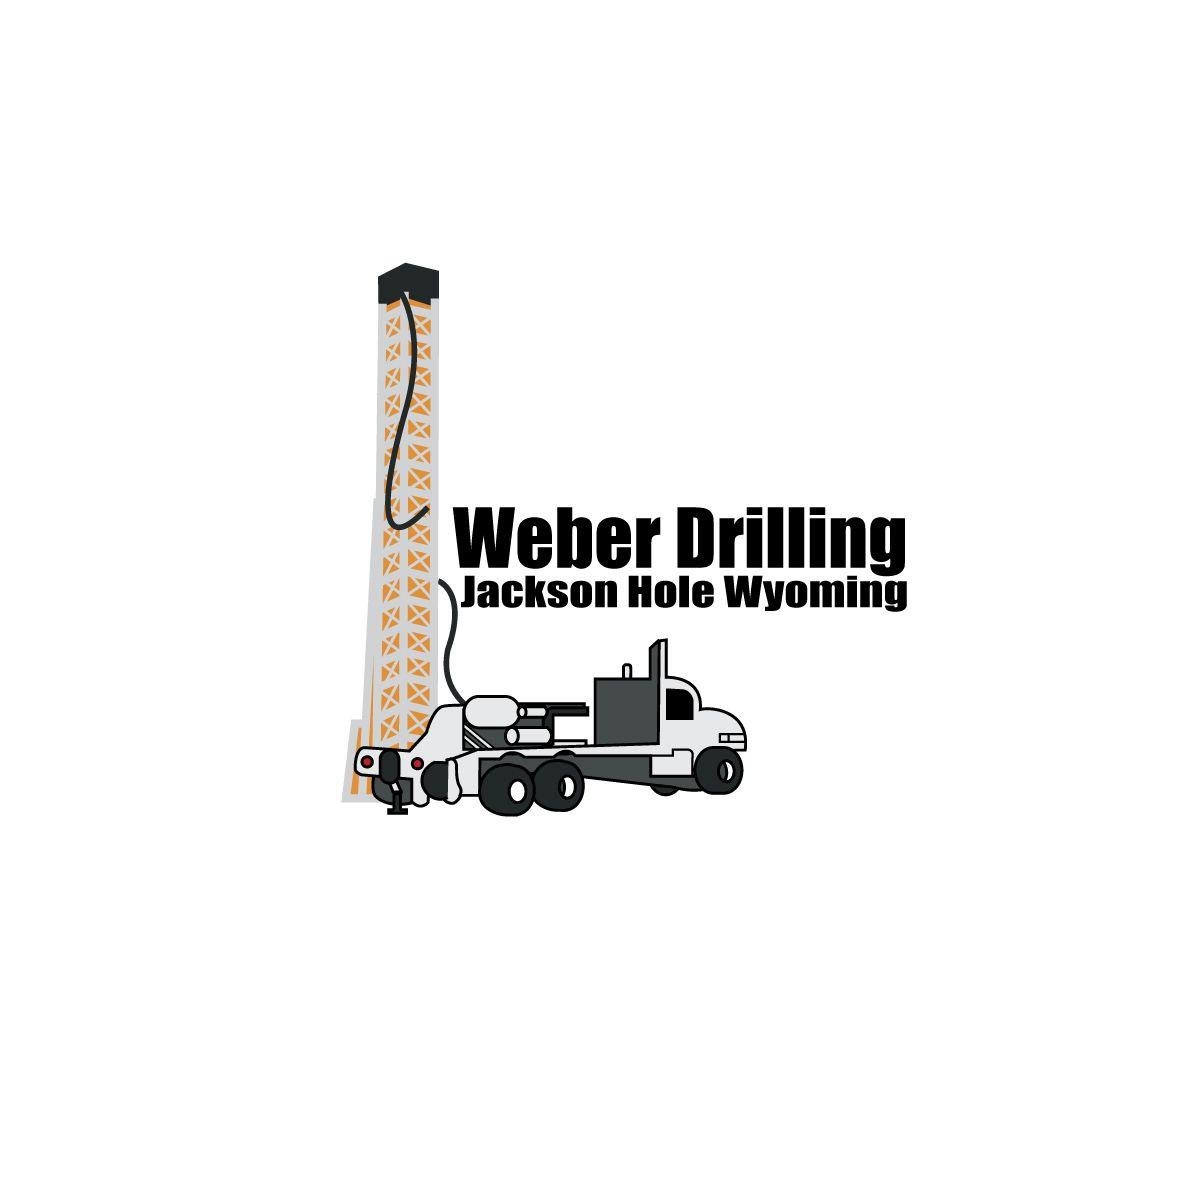 Drilling Company Logo - It Company Logo Design for Weber Drilling by eutographicz. Design